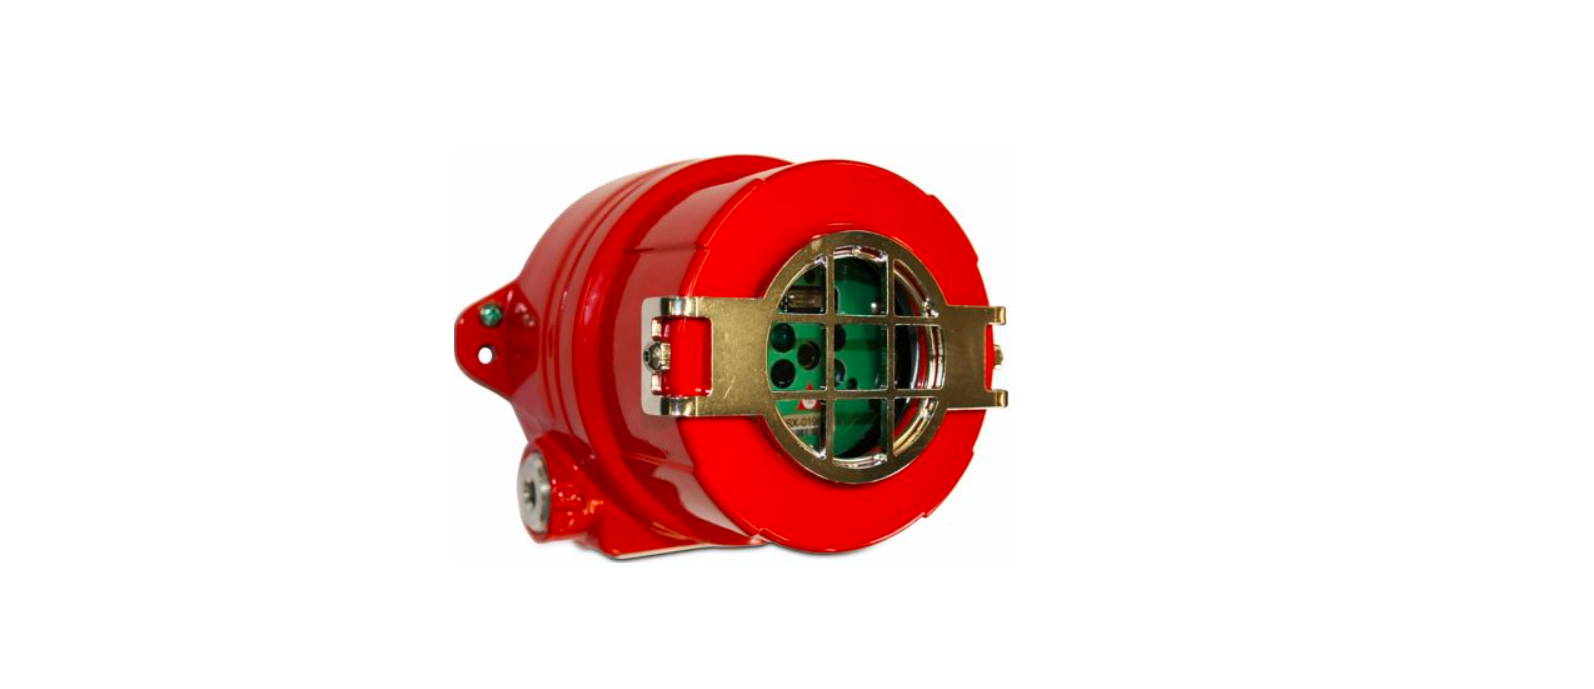 Honeywell-FS20X-Fixed-Flame-Detector-featured